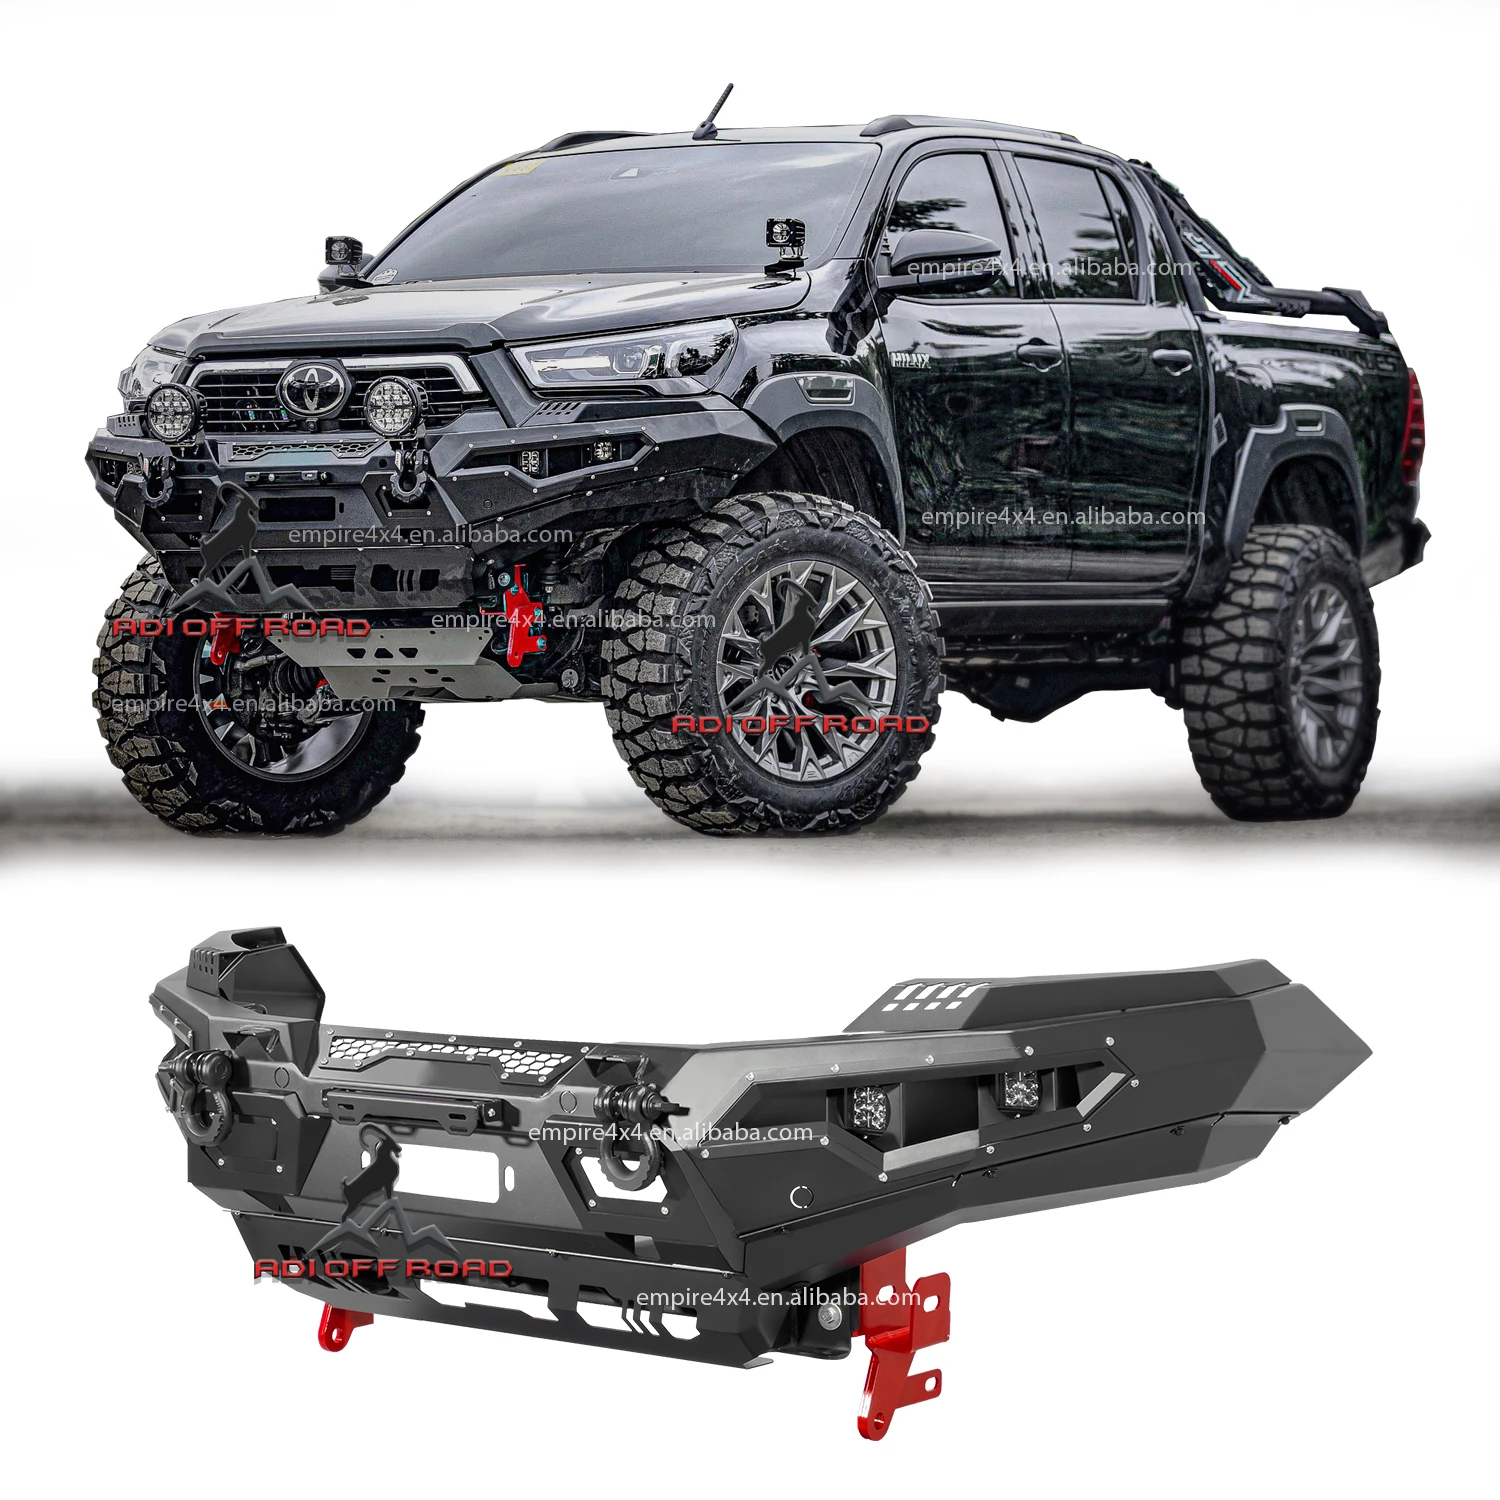 

Top 4x4 Pickup BULL BAR Steel front bumpers rear bumpers for -toyota hilux revo rogue Conquest vigo revo rocoo 2021 2022 2023